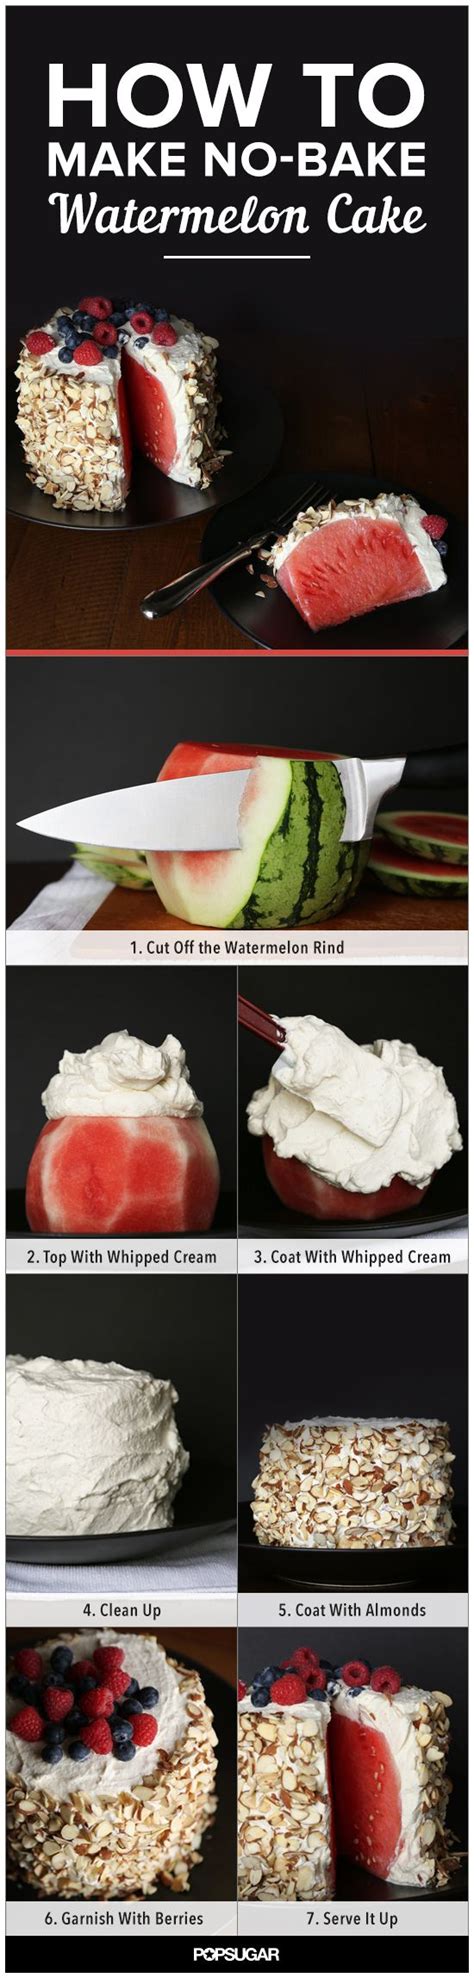 How To Make A No Bake Watermelon Cake In Pictures Watermelon Cake